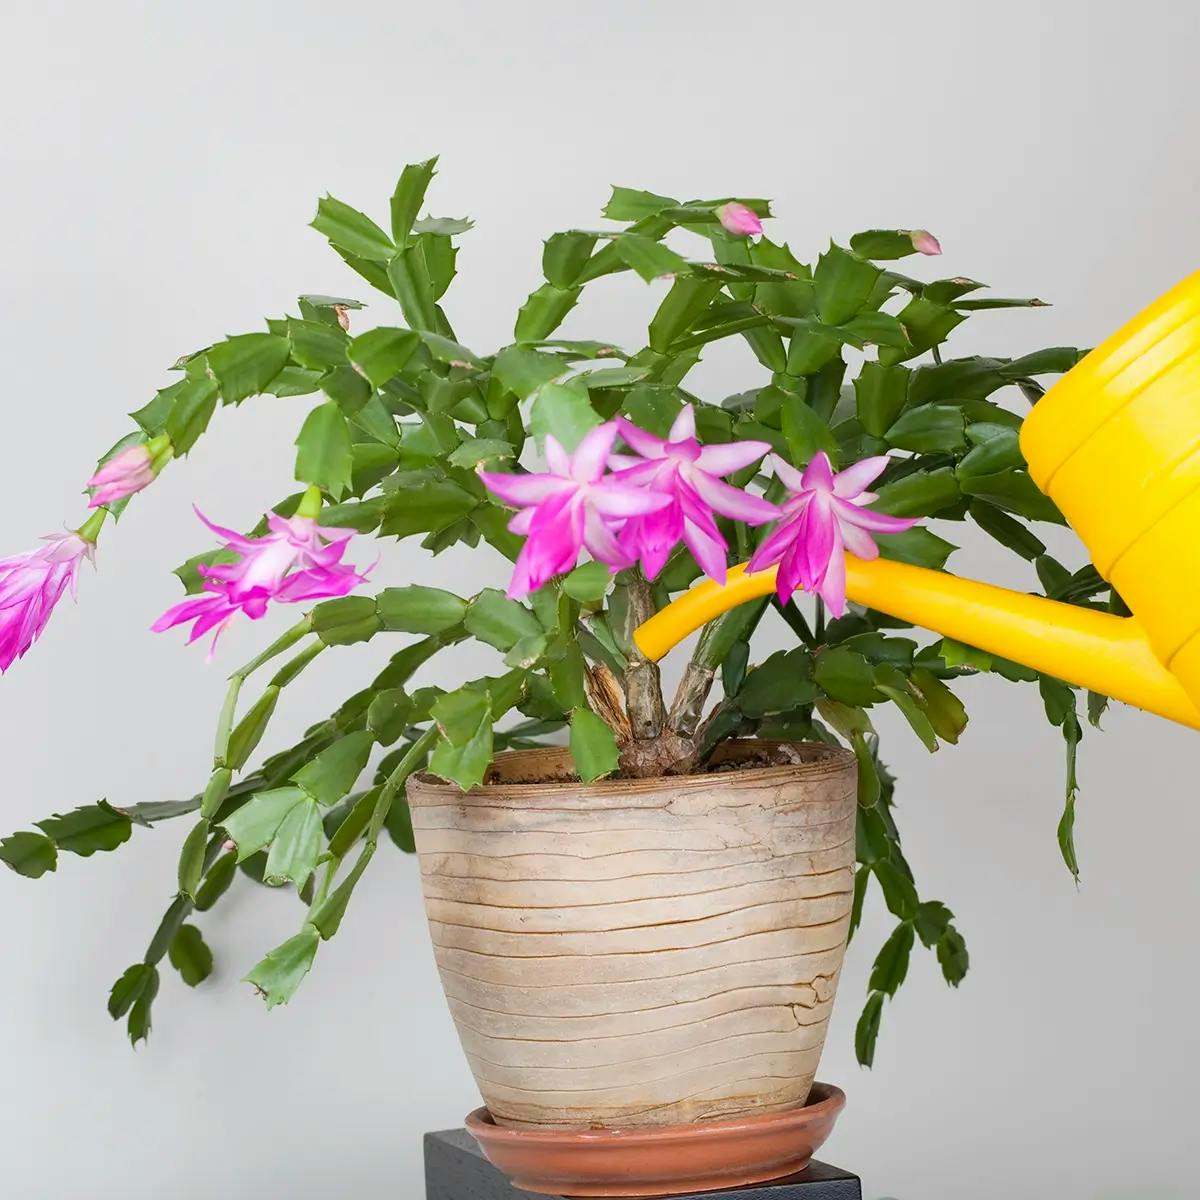 A pink Christmas Cactus being watered with a yellow watering can held by a hand.